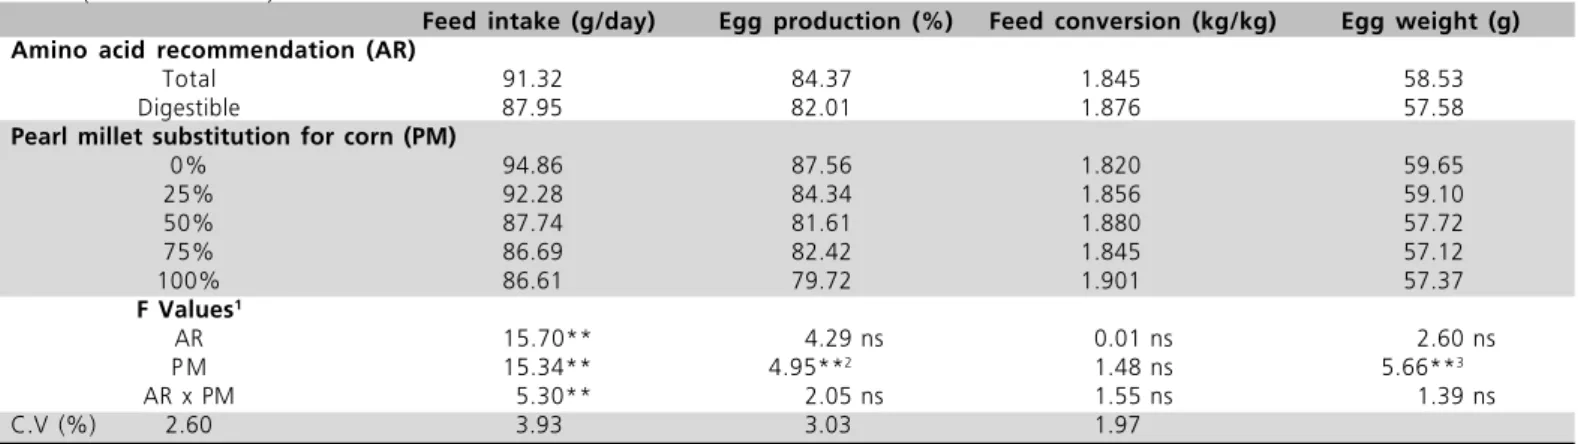 Table 3 - Performance of laying hens fed diets formulated on a total or digestible amino acid basis and with increasing levels of pearl millet (25 to 45 weeks).